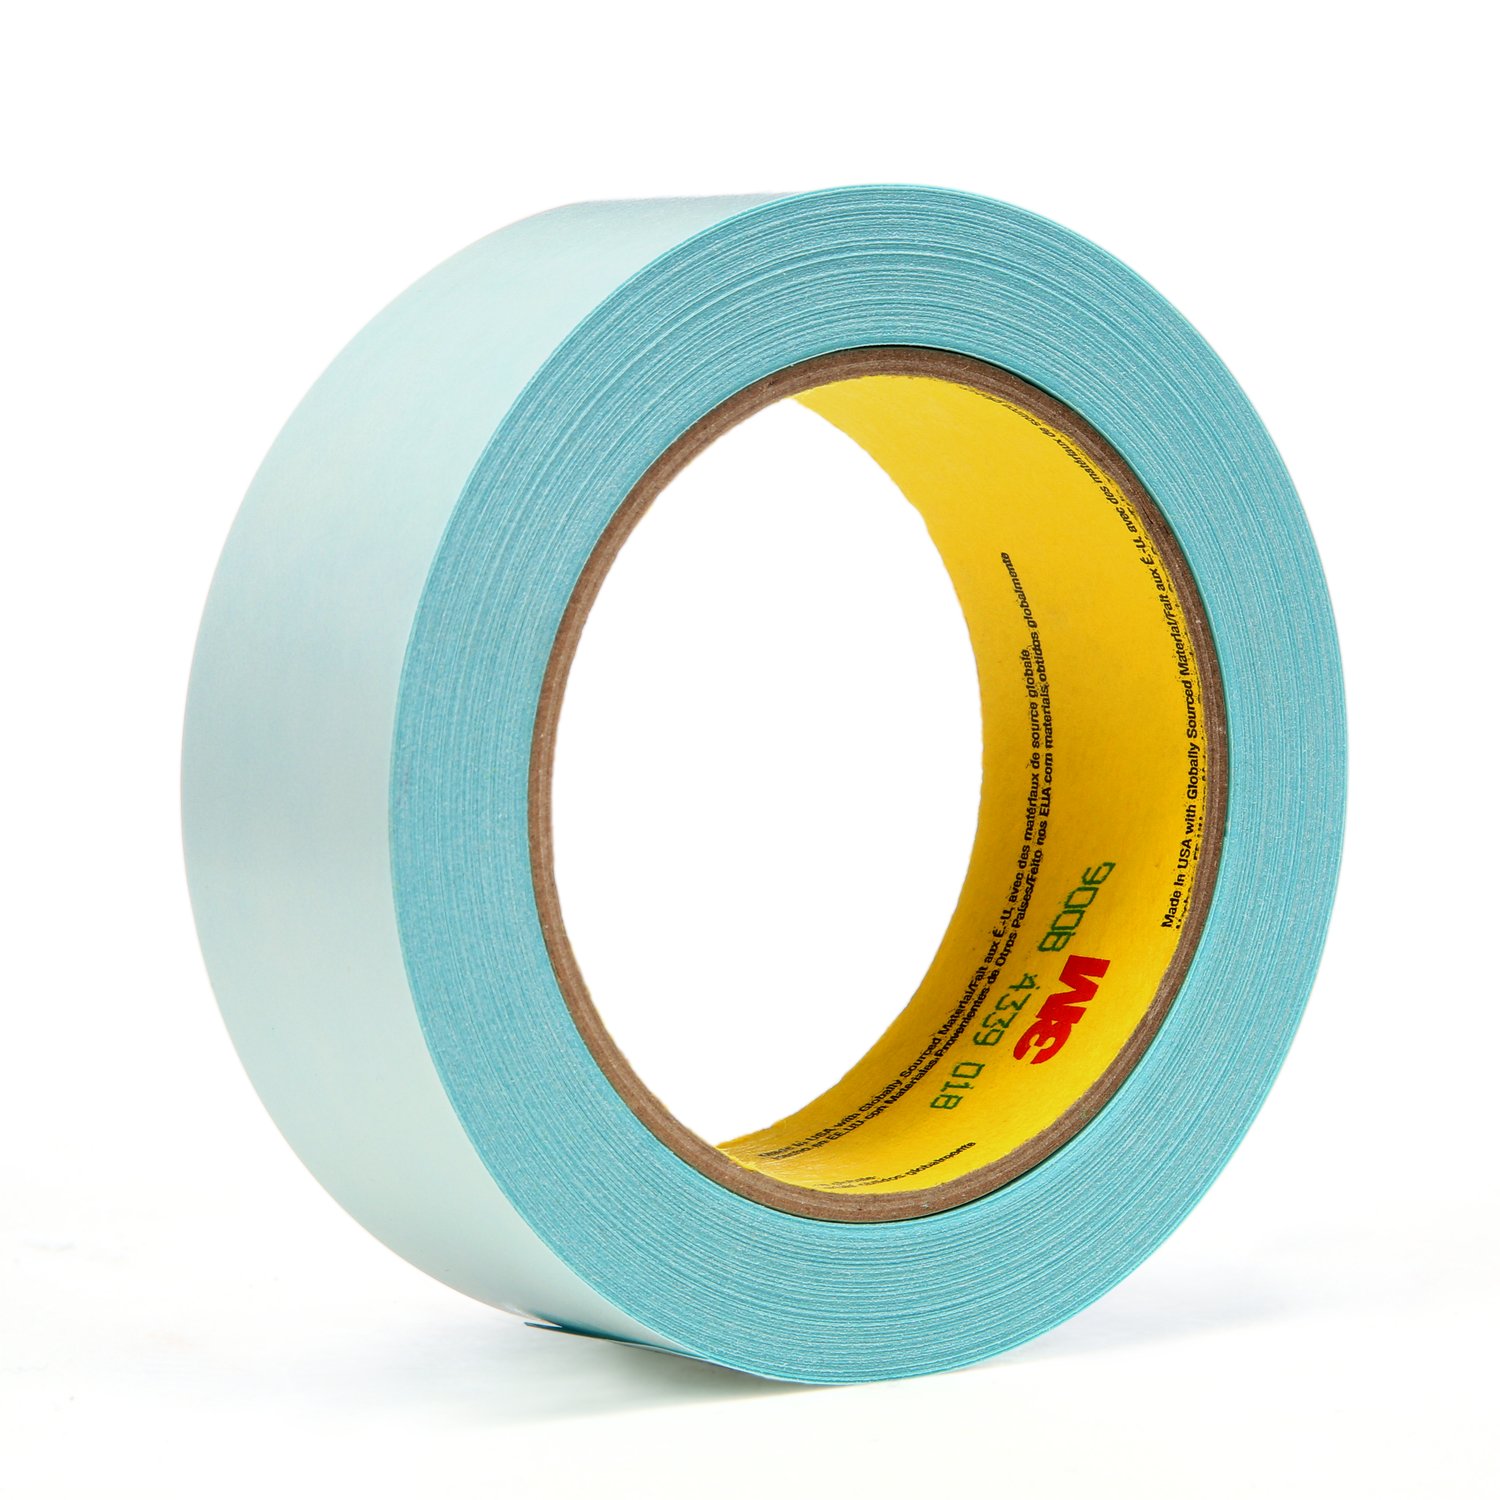 7100027946 - 3M Repulpable Double Coated Splicing Tape 900, 36 mm x 33 m, 2.5 mil,
24 rolls per case